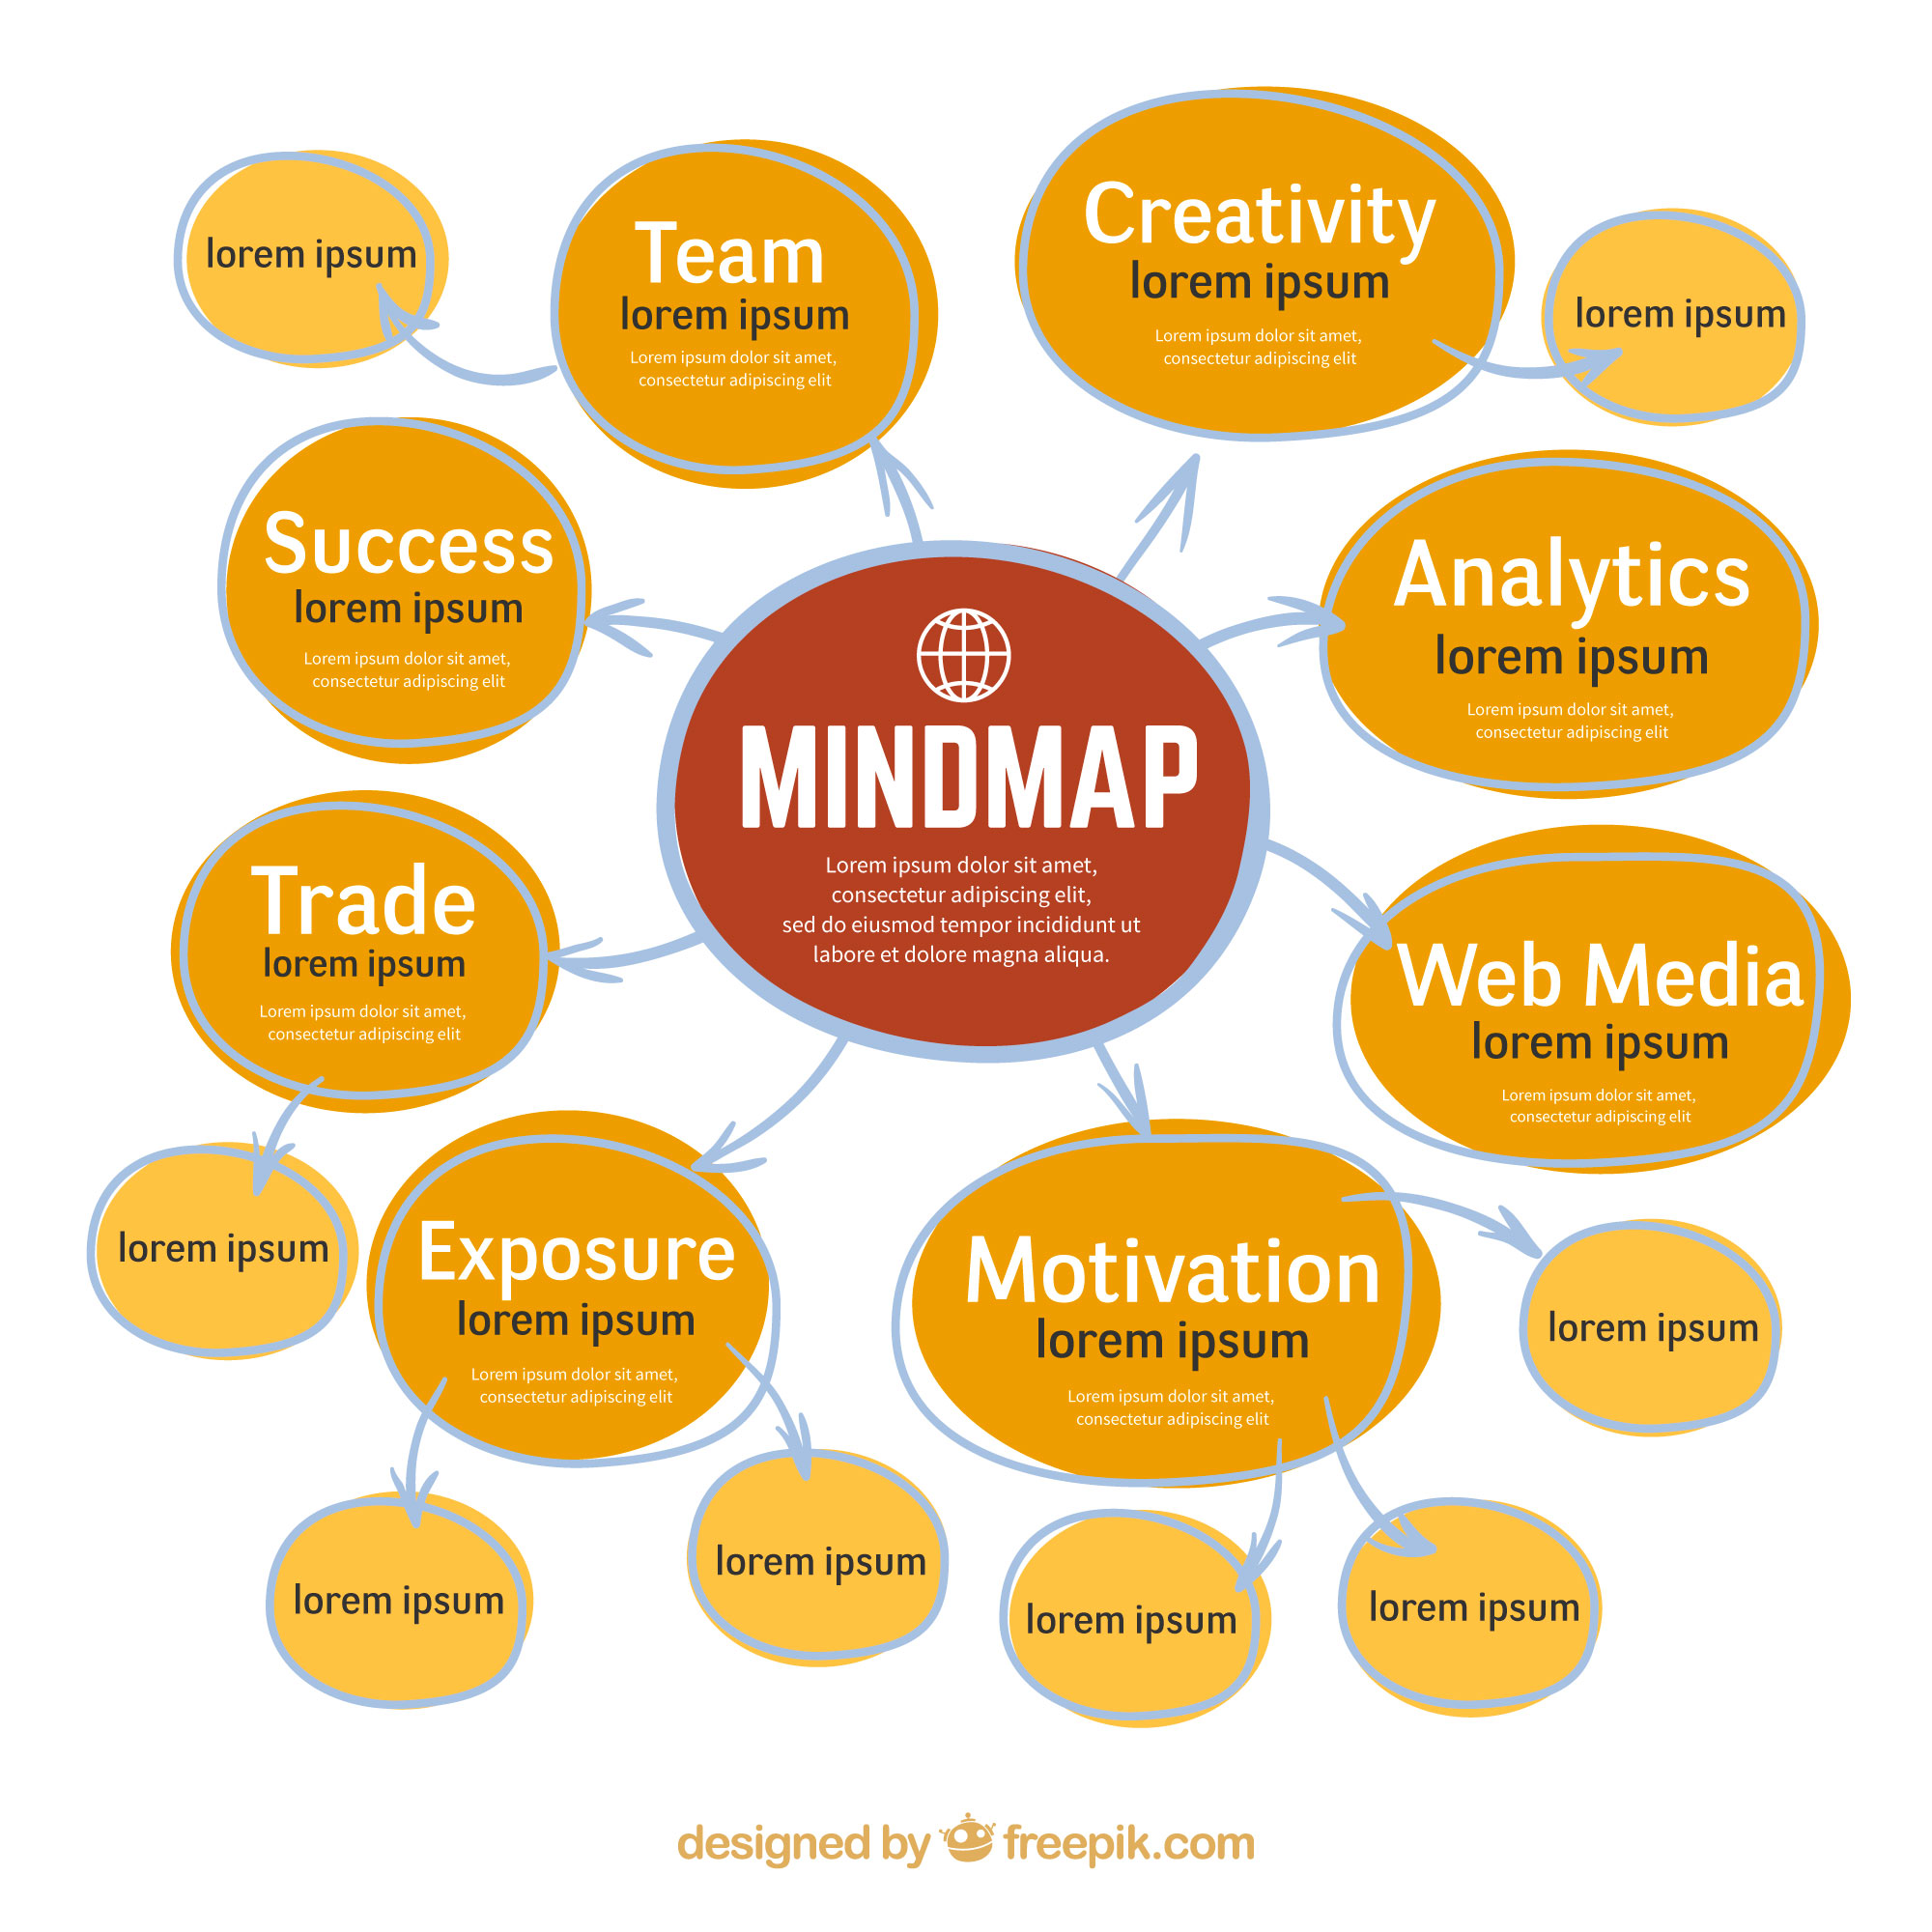 picture of a mind mapping diagram